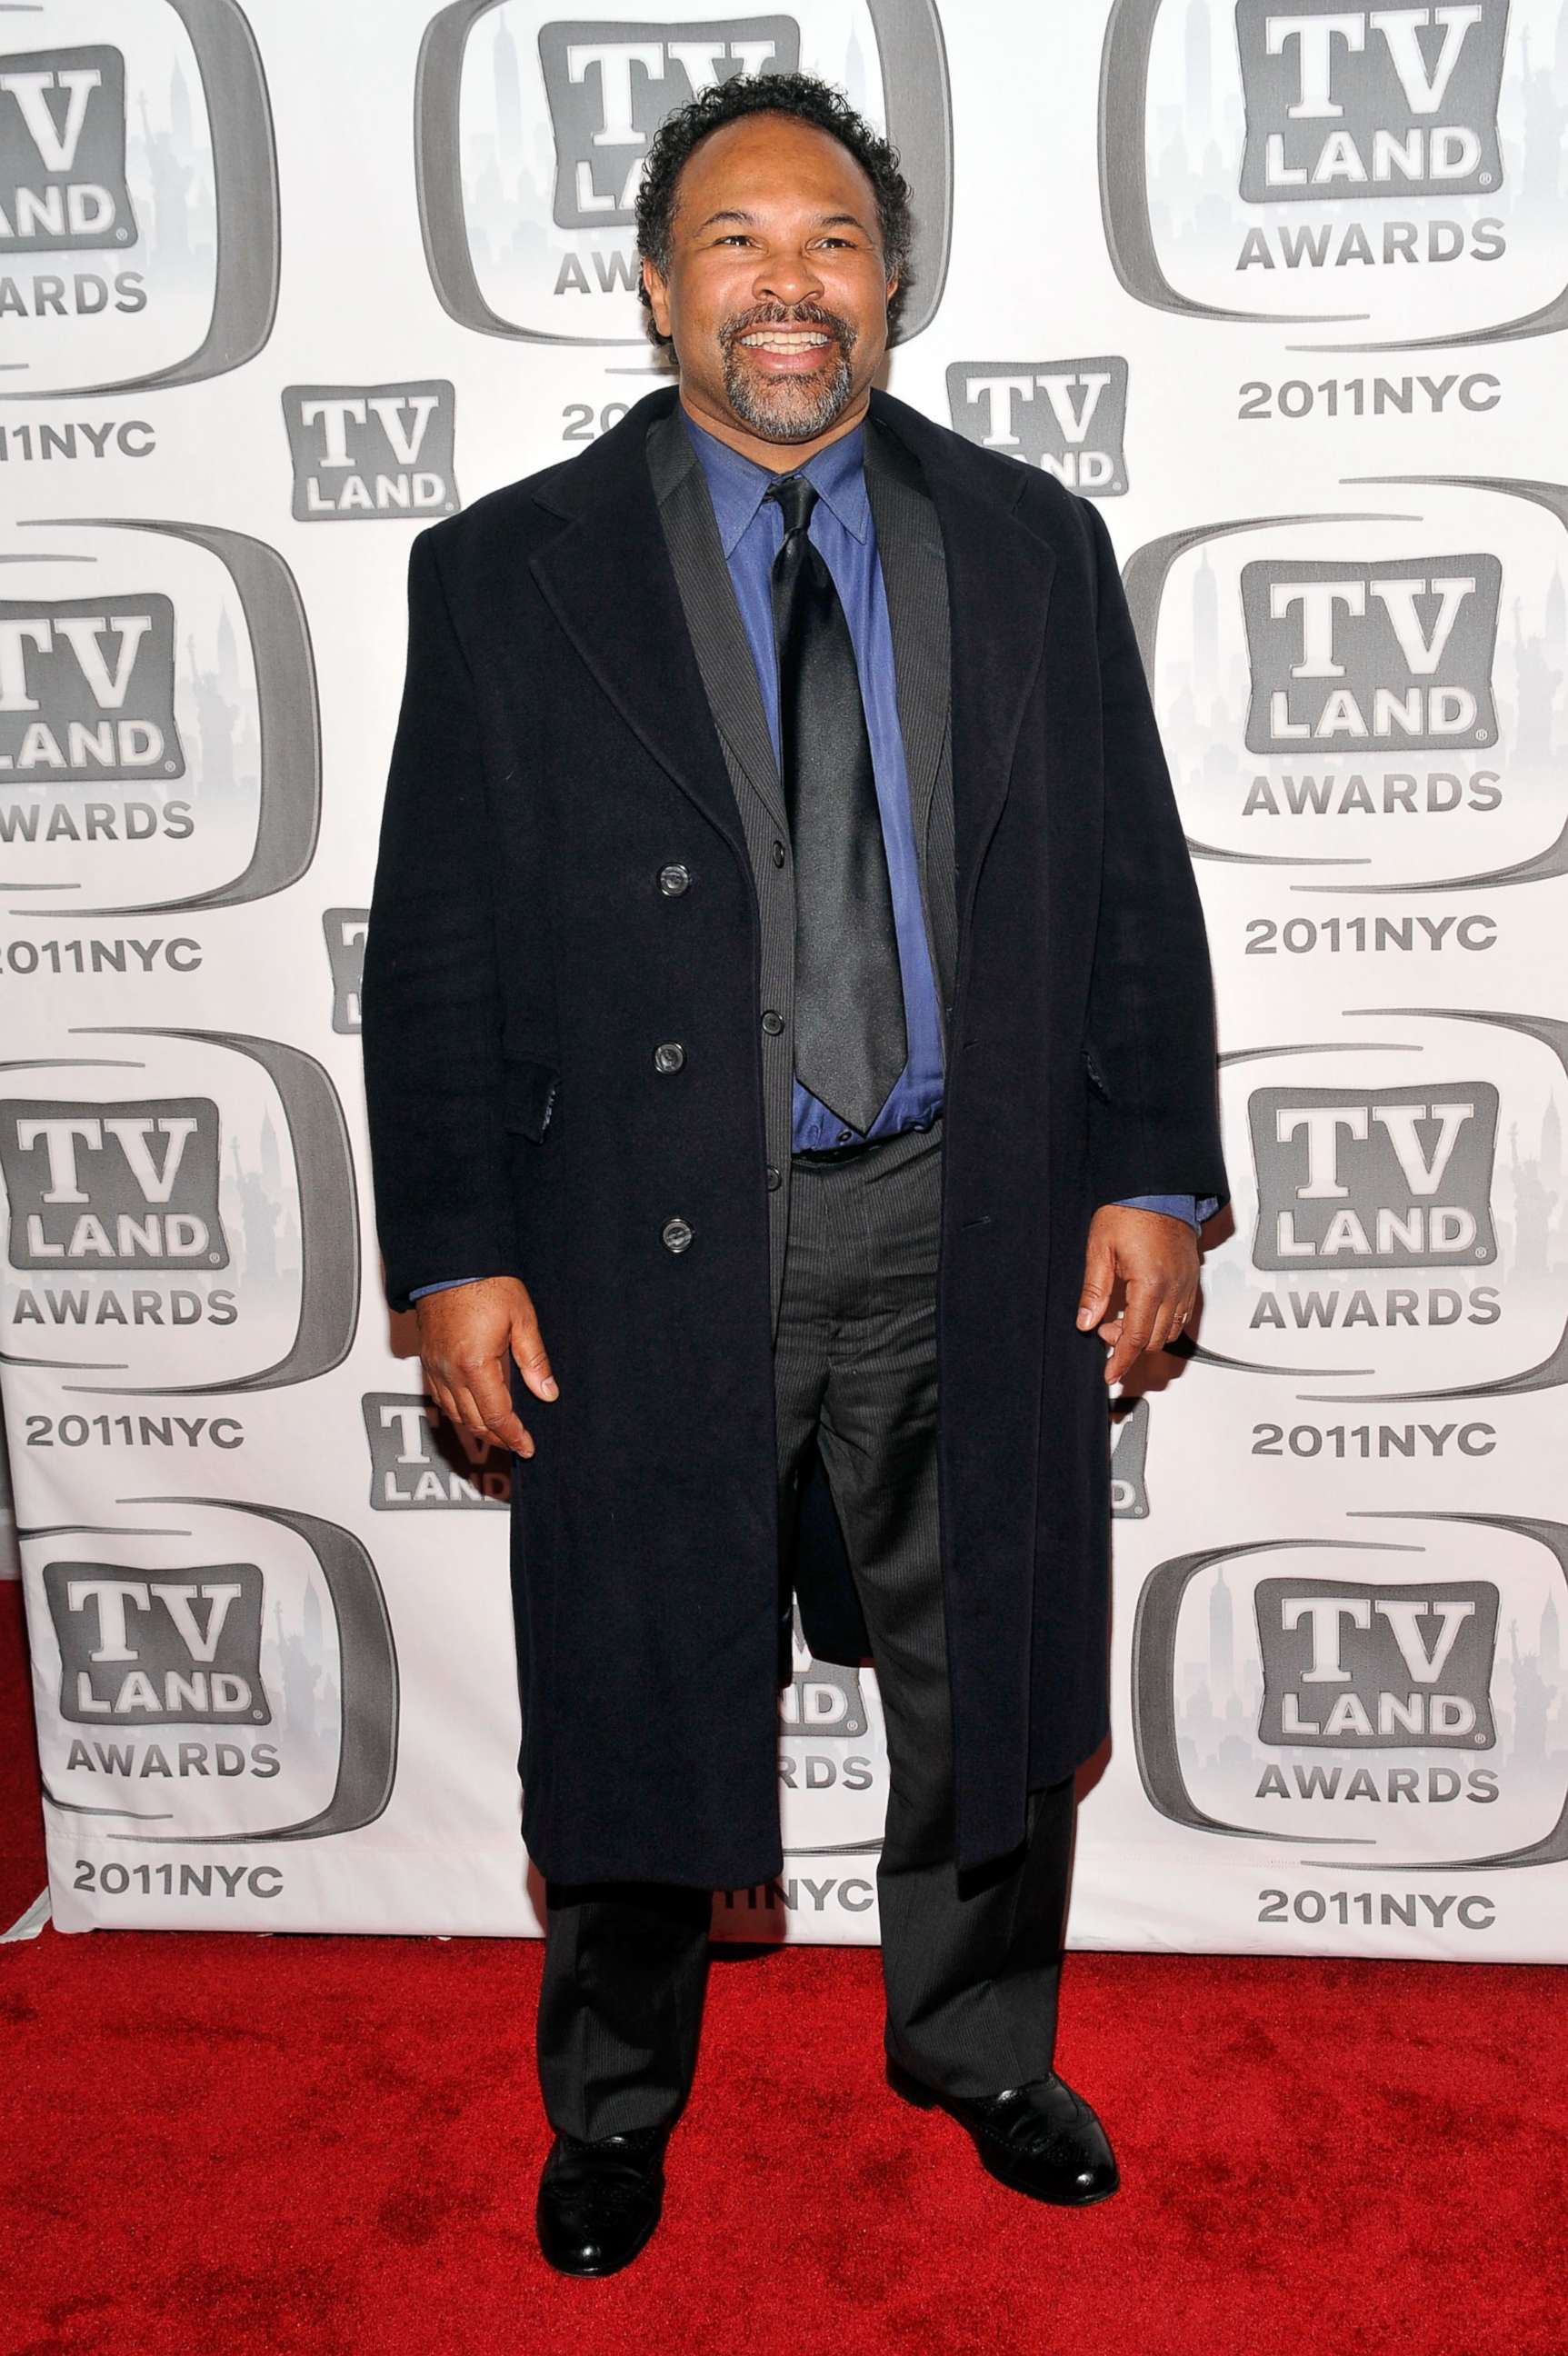 PHOTO: Actor Geoffrey Owens attends the 9th Annual TV Land Awards at the Javits Center in this April 10, 2011 file photo in New York.